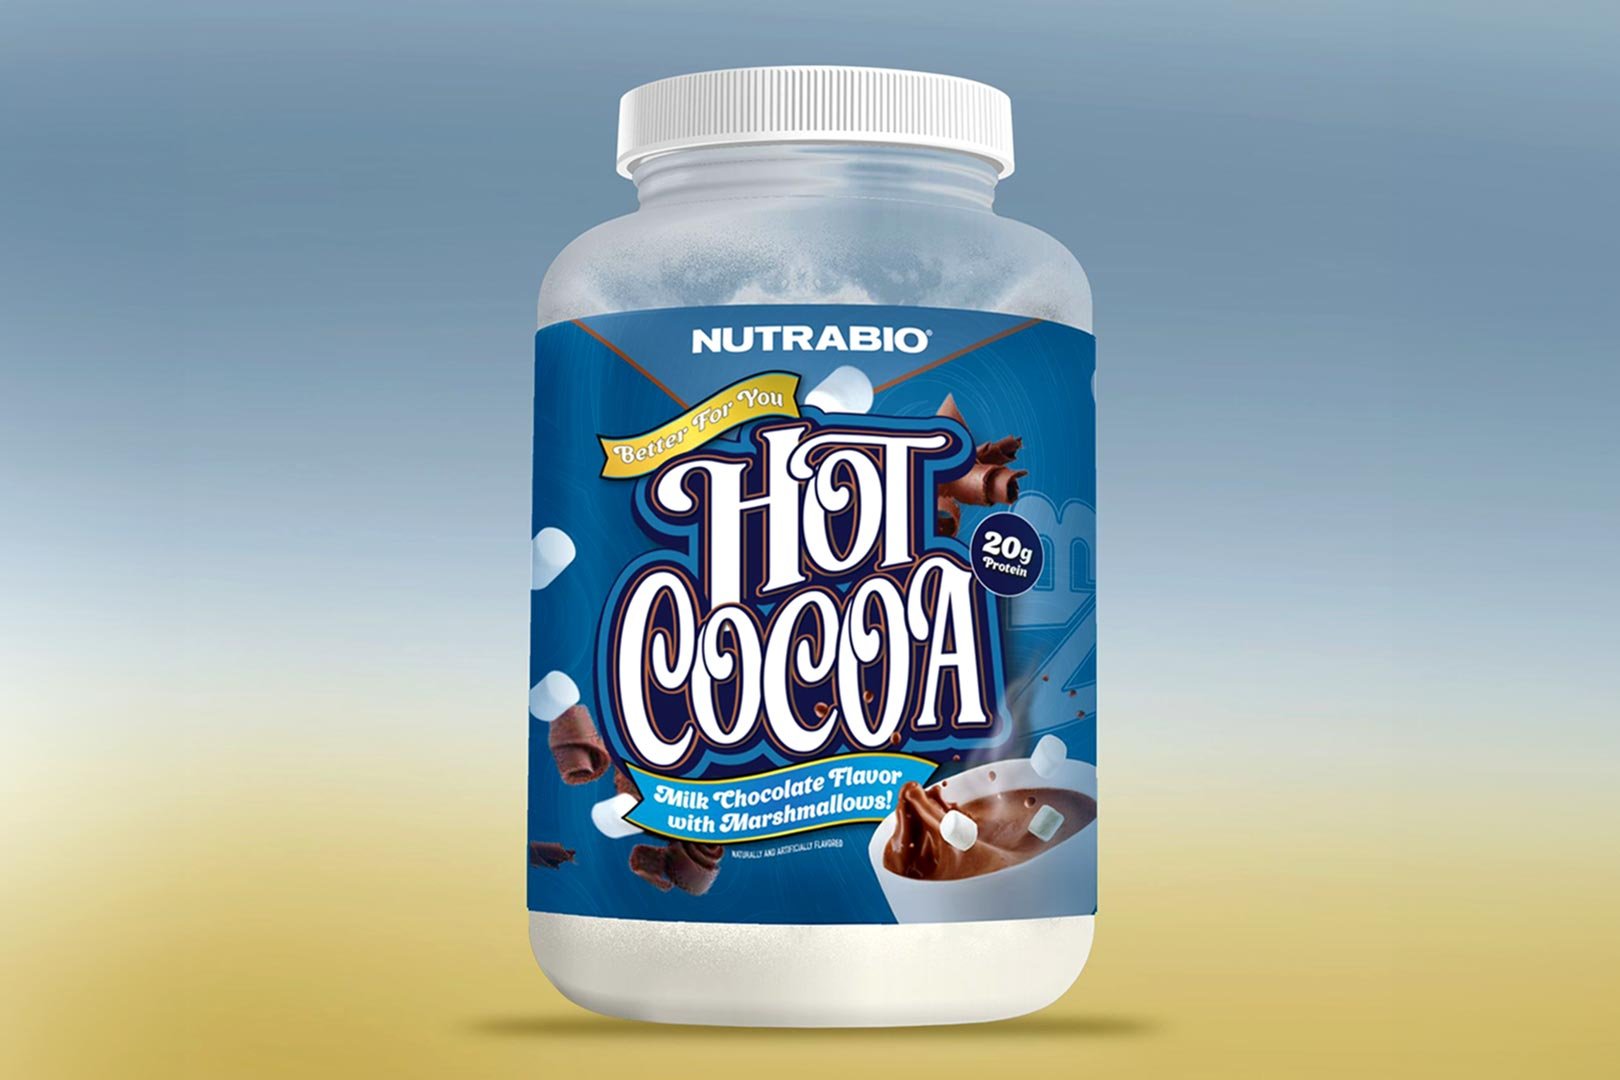 Nutrabio Better For You Hot Cocoa